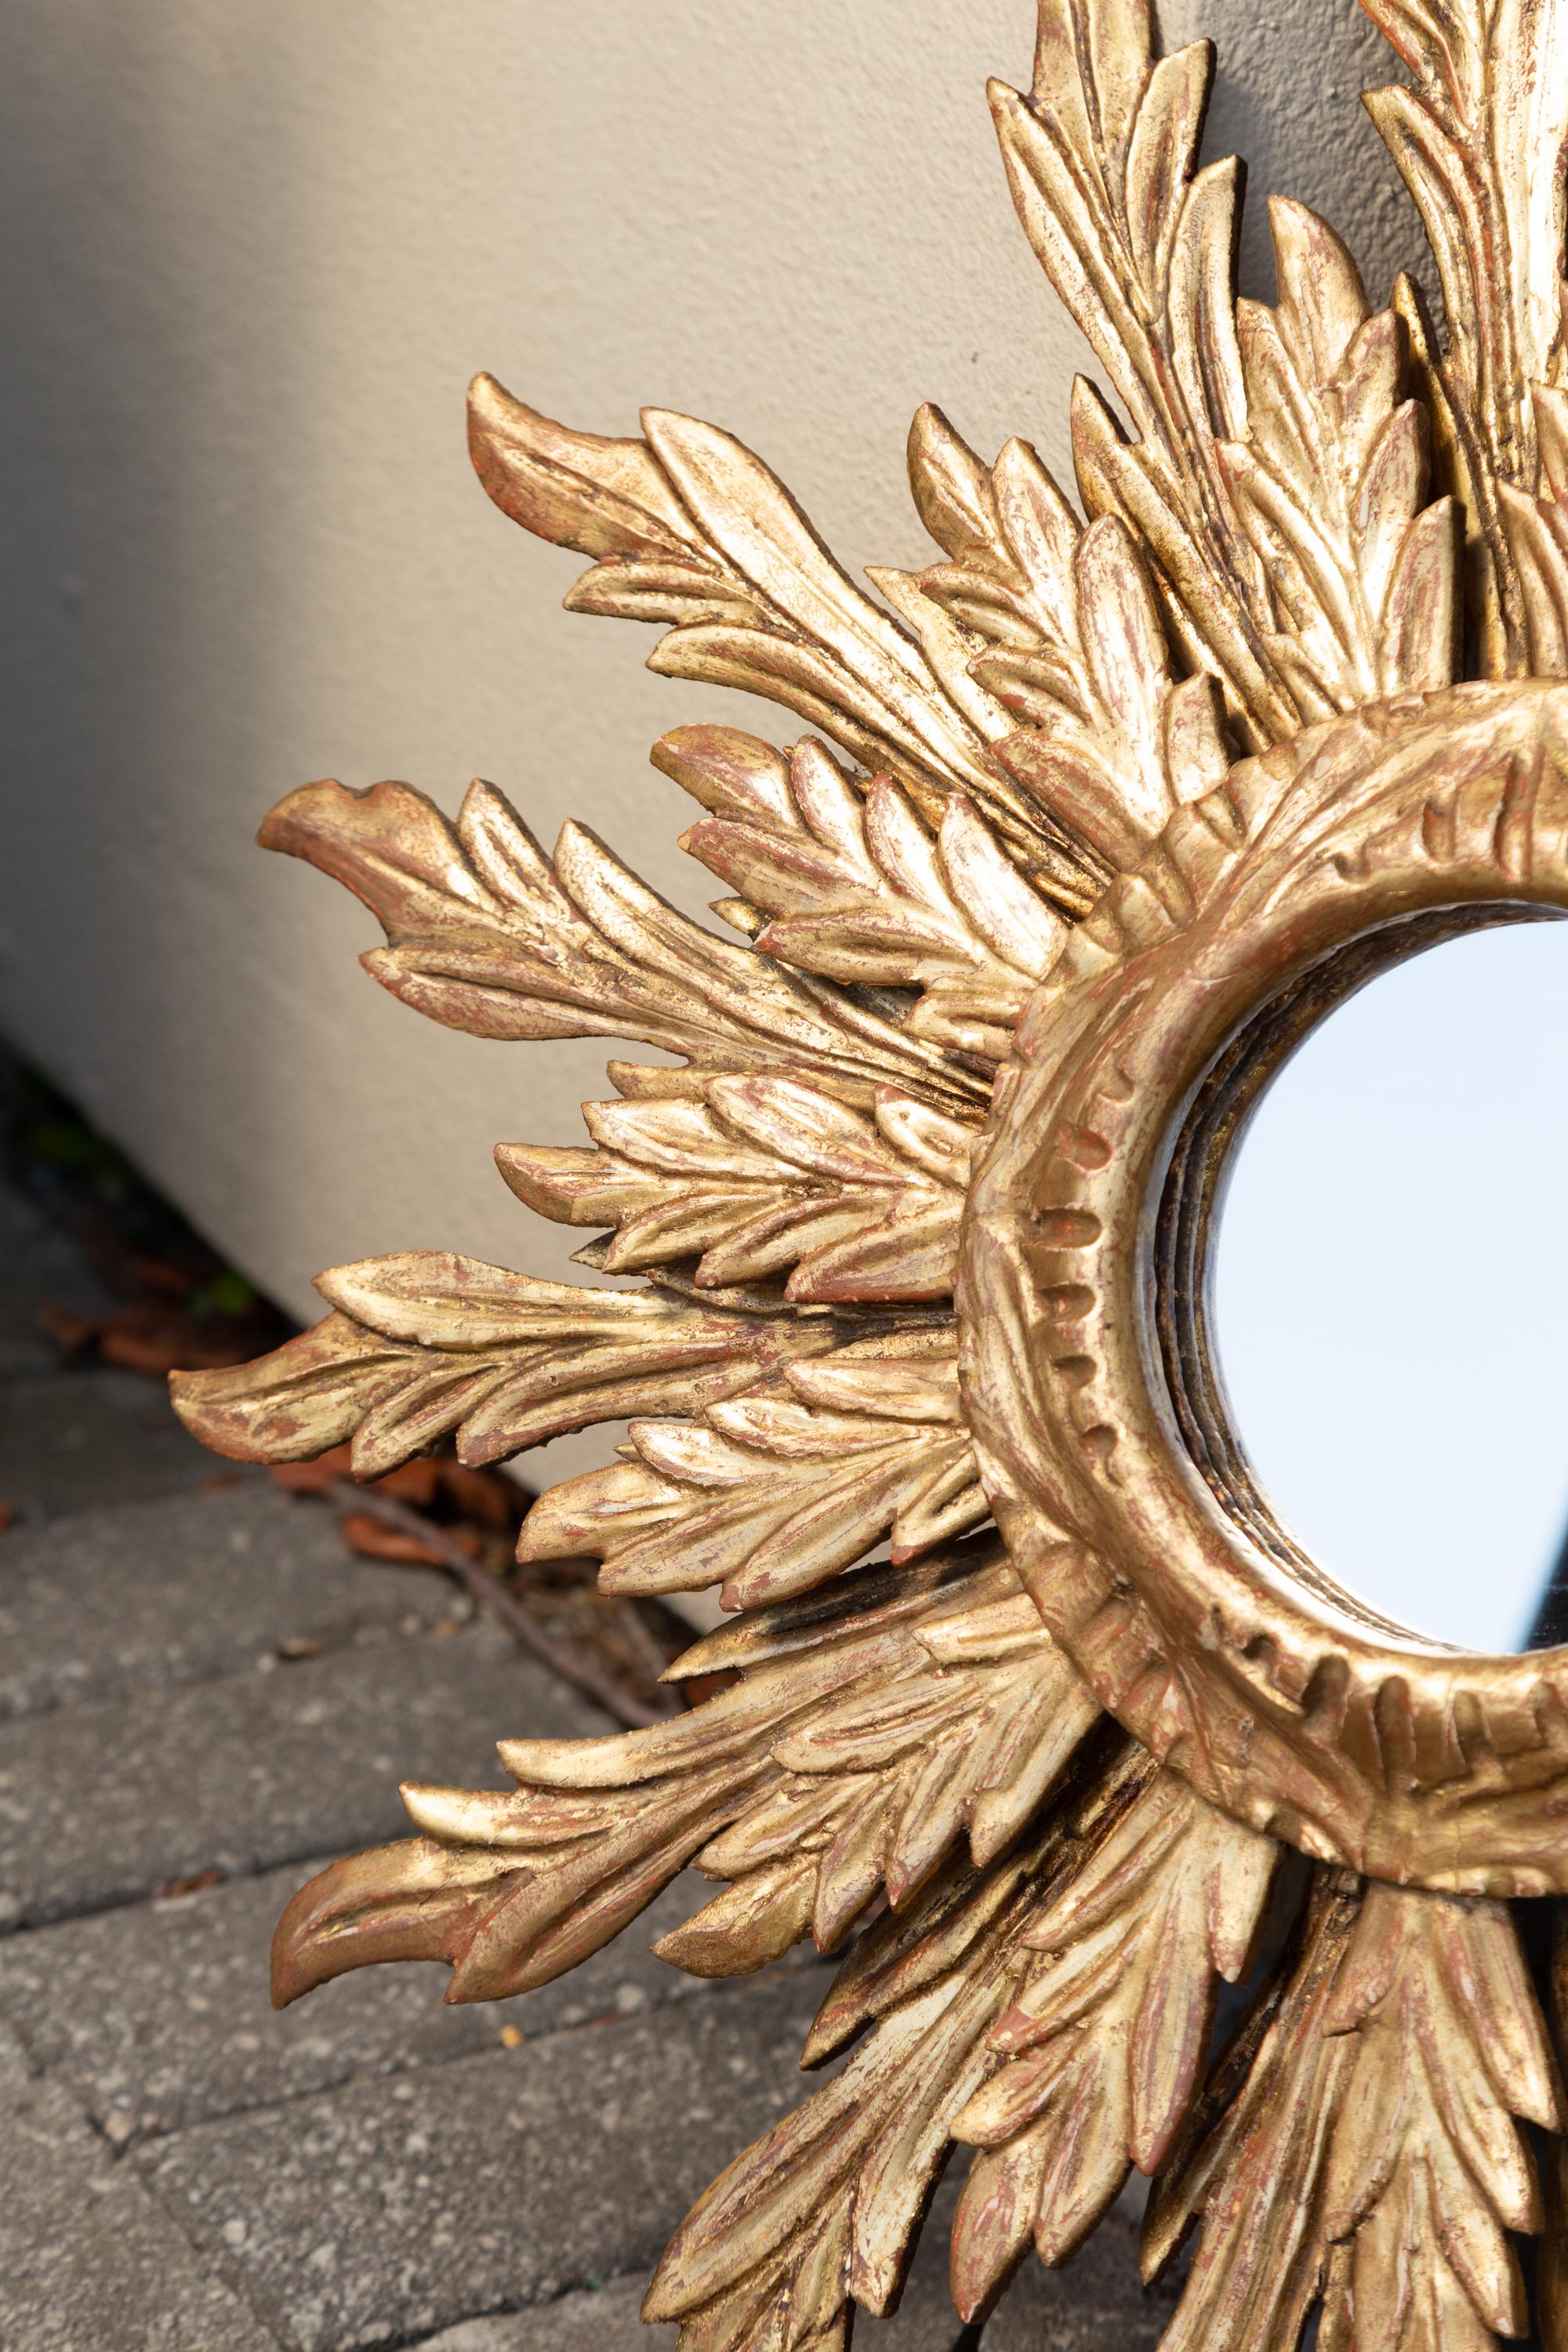 French Giltwood Sunburst Mirror with Wavy Sunrays from the Mid-20th Century For Sale 1